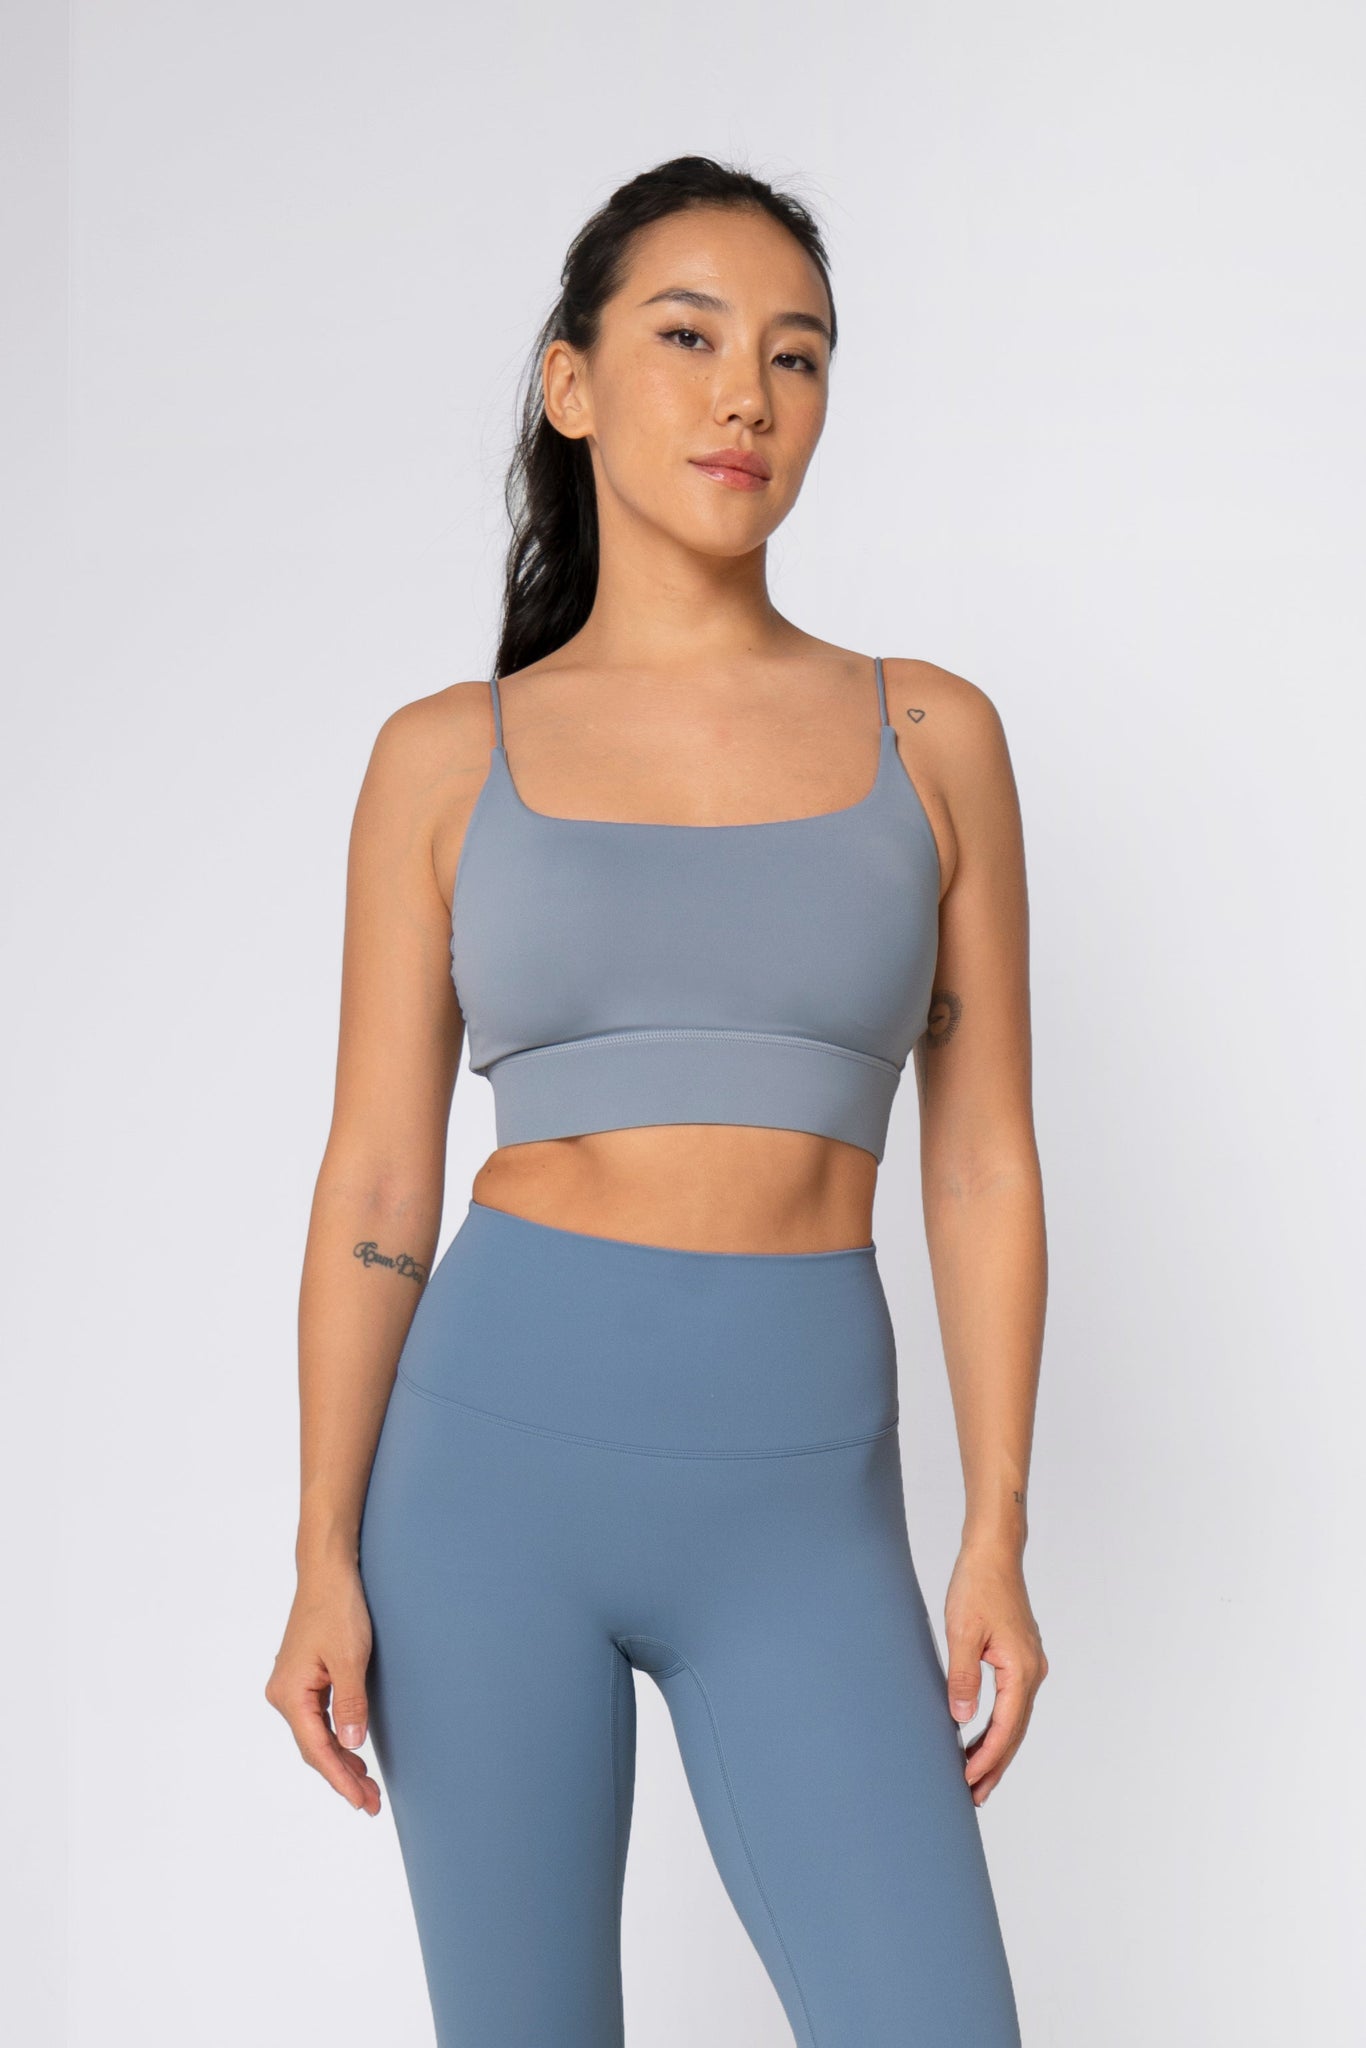 The Upside Bra [2-Piece Top Only]